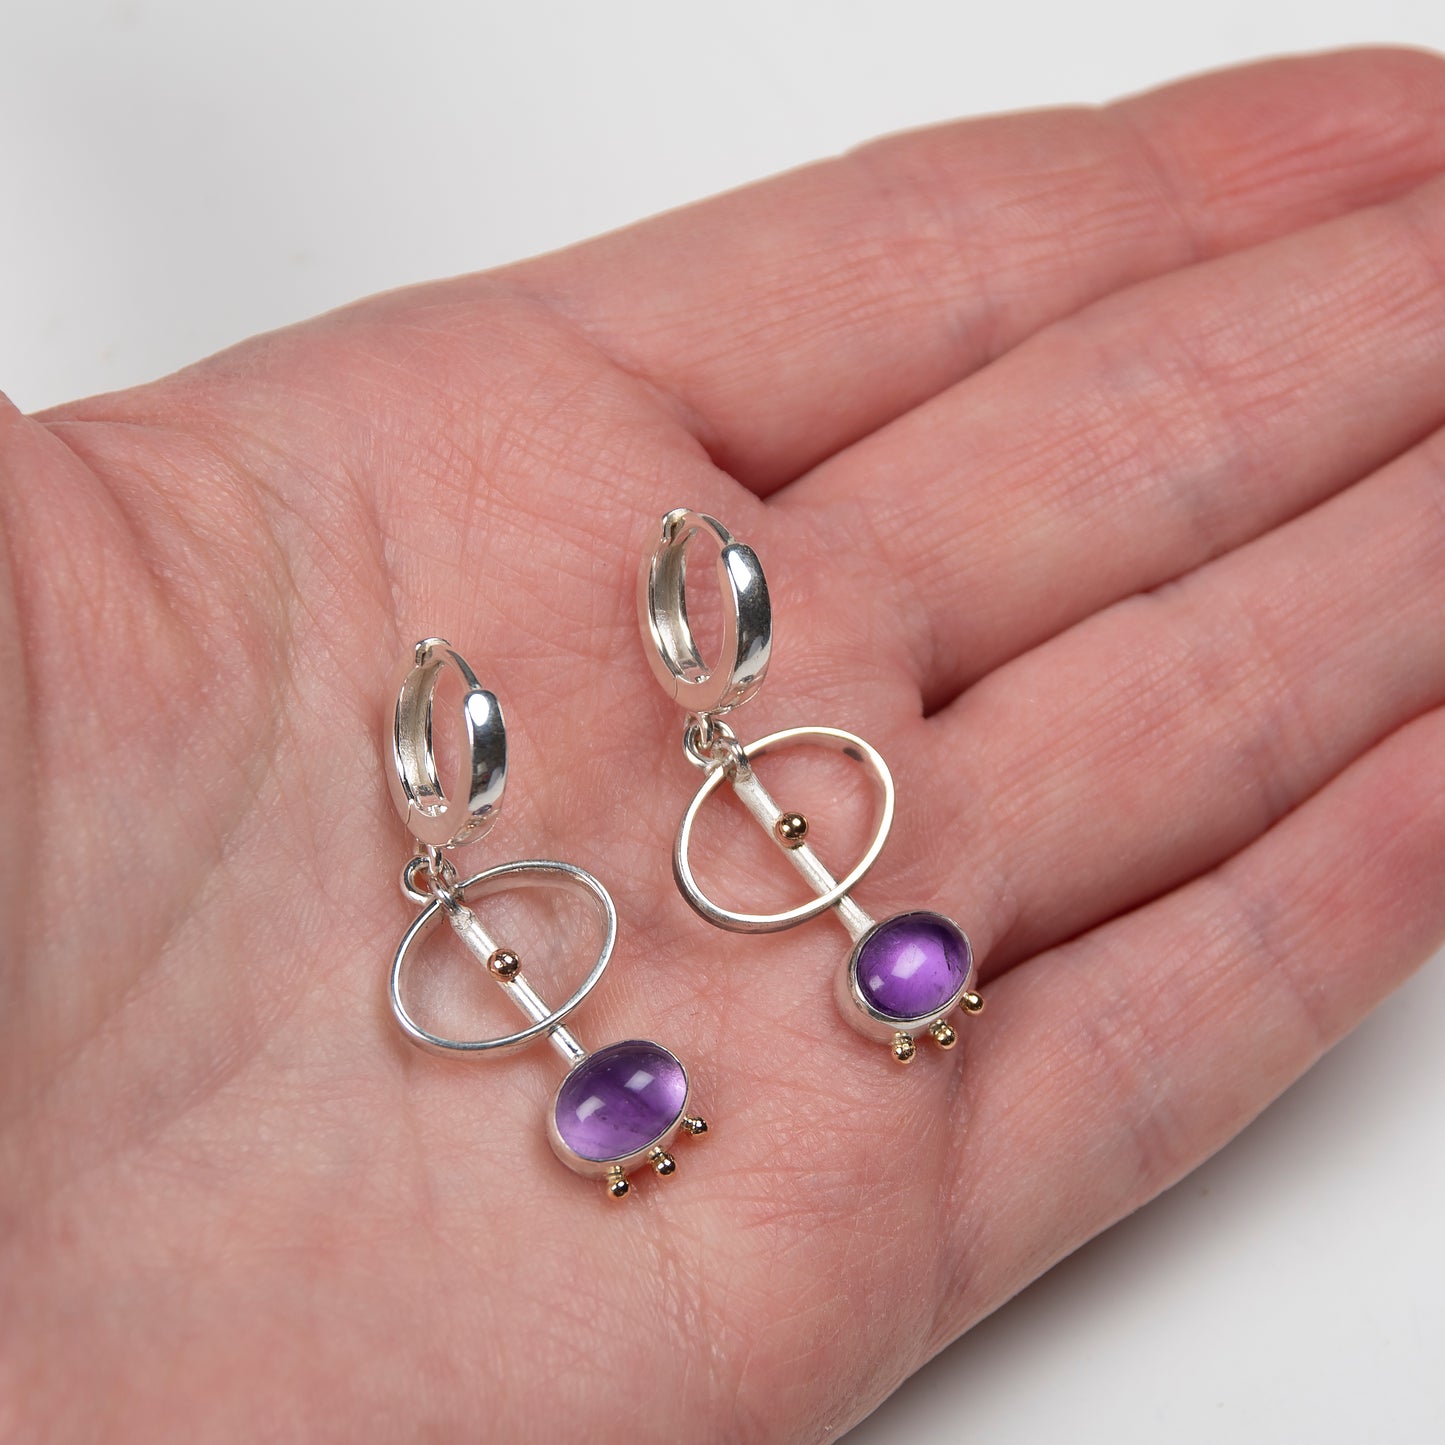 Long Drop Earrings With Amethyst And Gold Beads